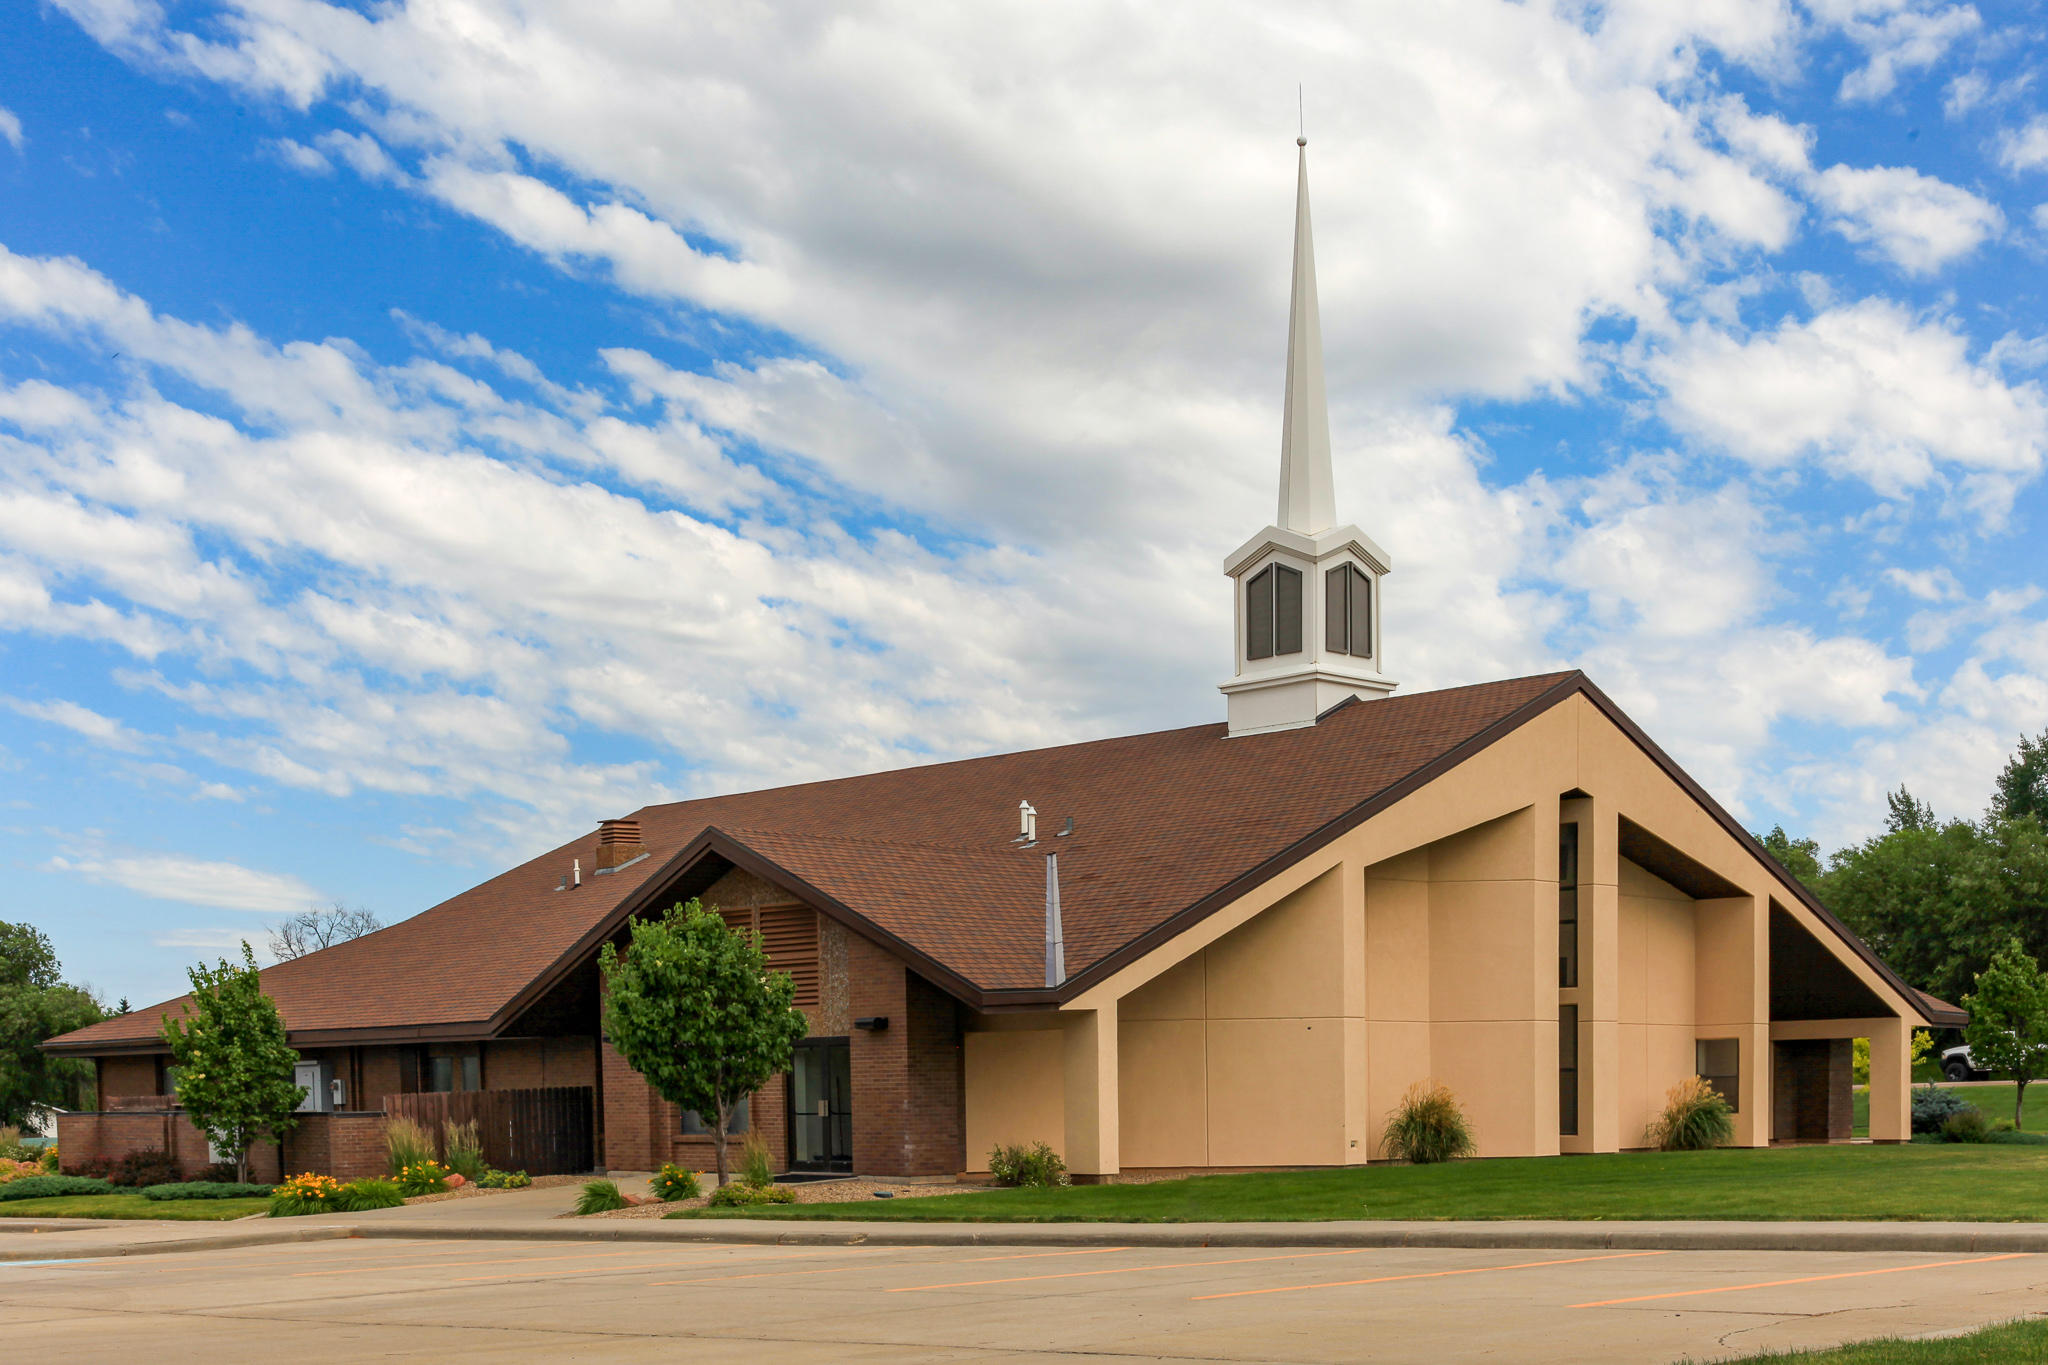 The Church of Jesus Christ of Latter-day Saints, Hot Springs SD 57747